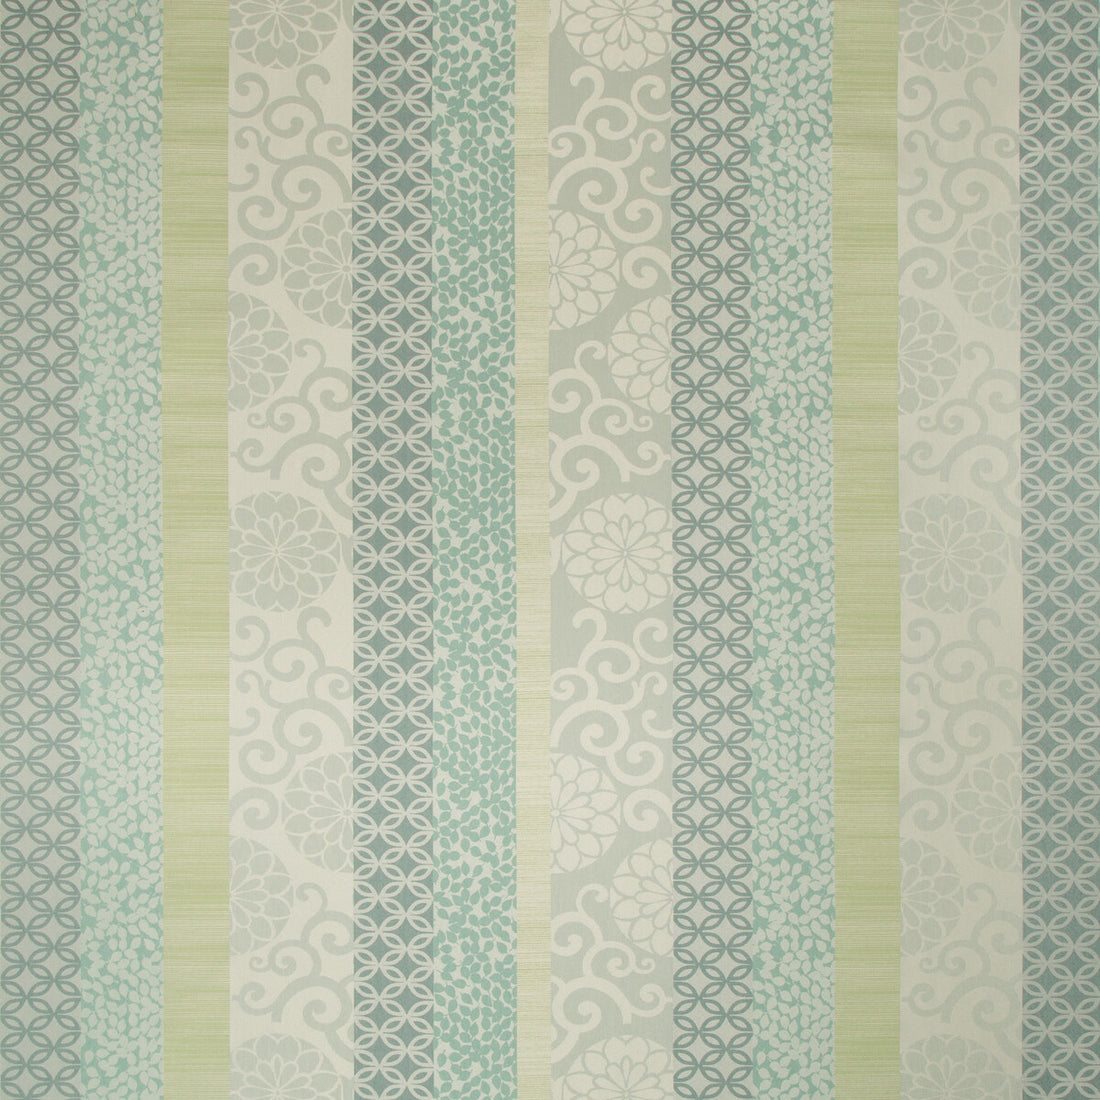 Kamala fabric in tranquility color - pattern 4628.23.0 - by Kravet Contract in the Privacy Curtains collection